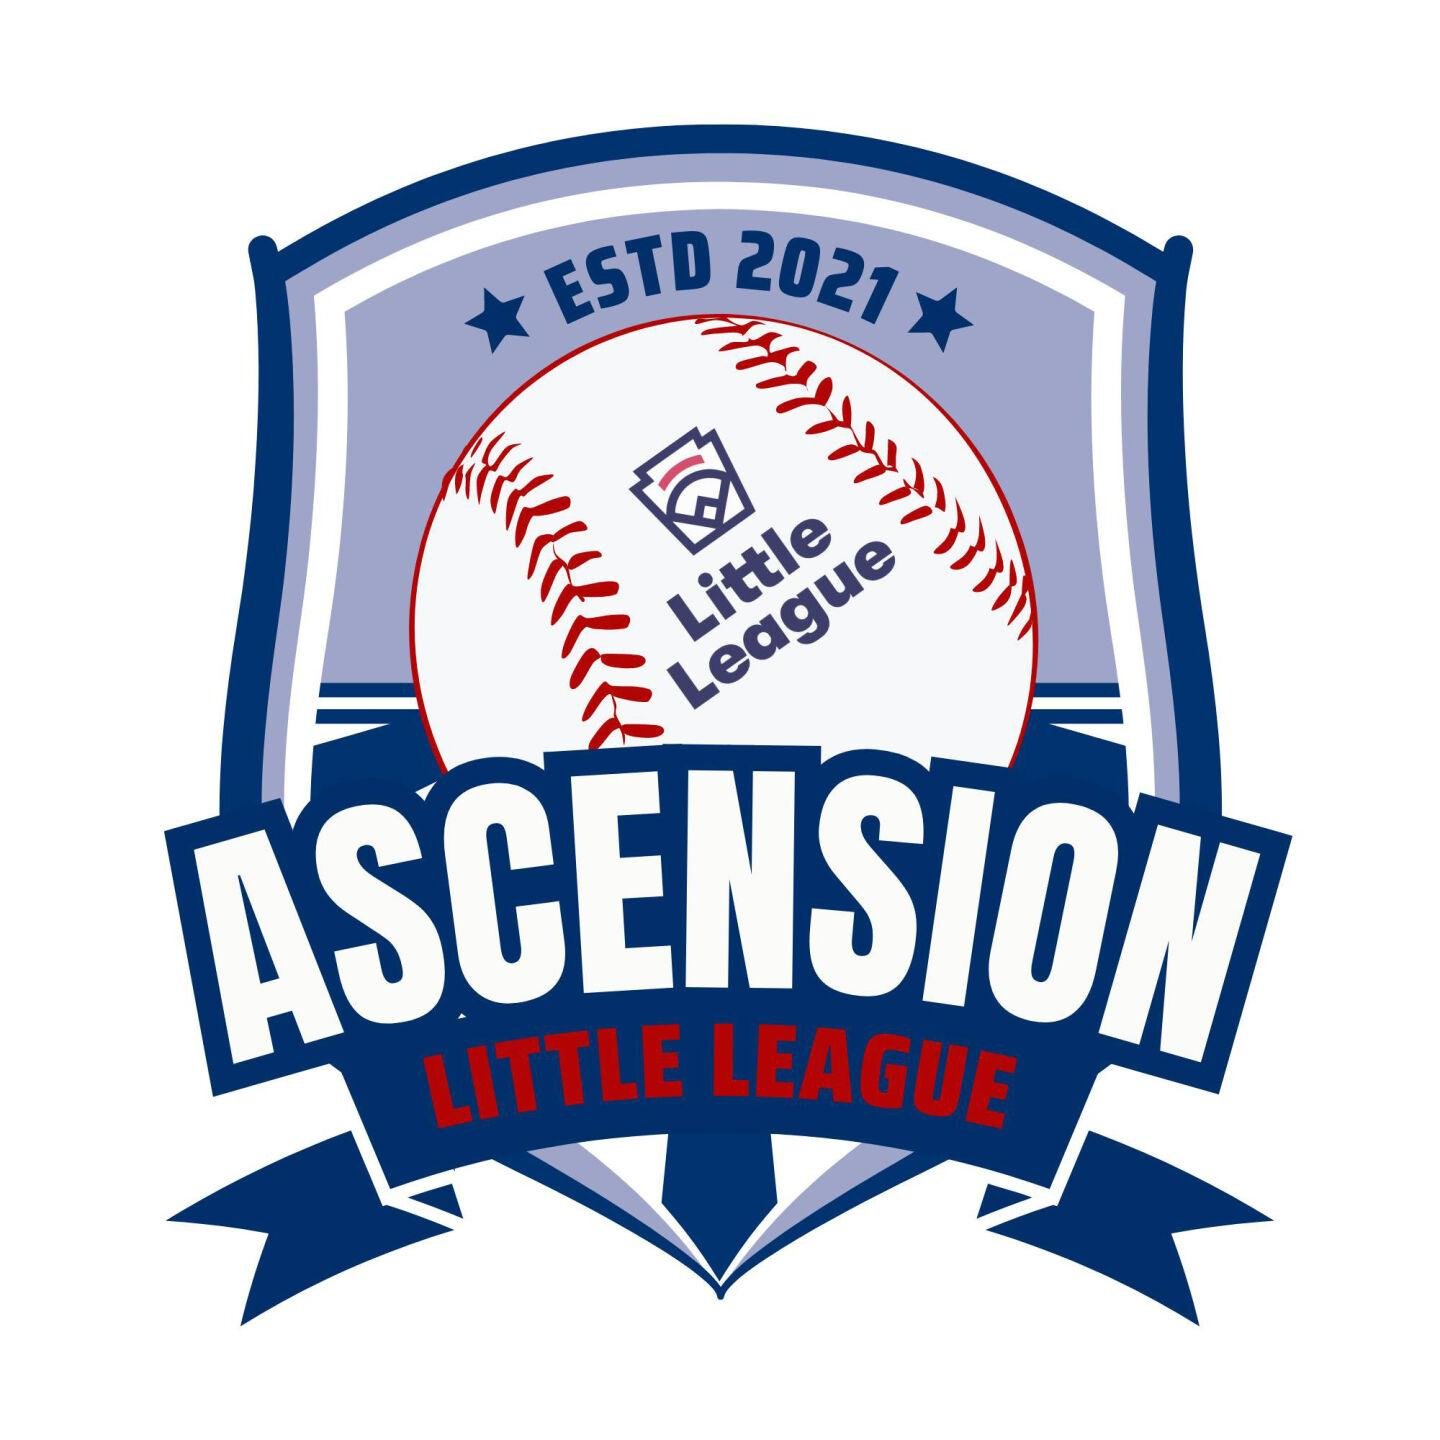 Ascension Little League team headed to Southwest Regional tourney in Texas, Ascension